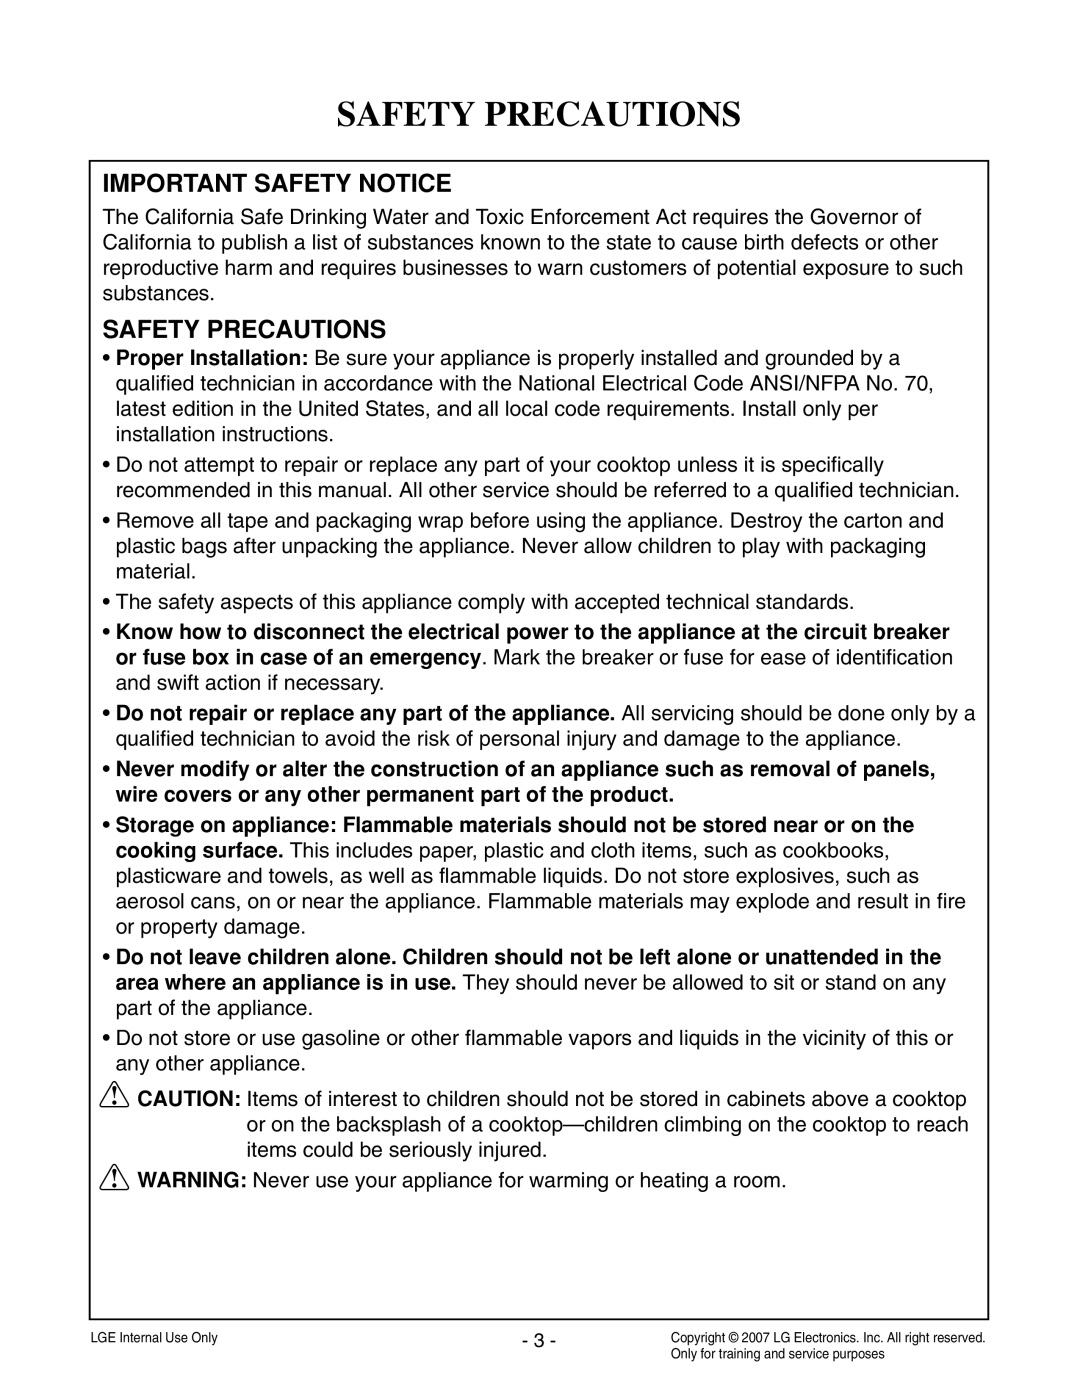 LG Electronics LCE30845 service manual Safety Precautions, WARNING Never use your appliance for warming or heating a room 